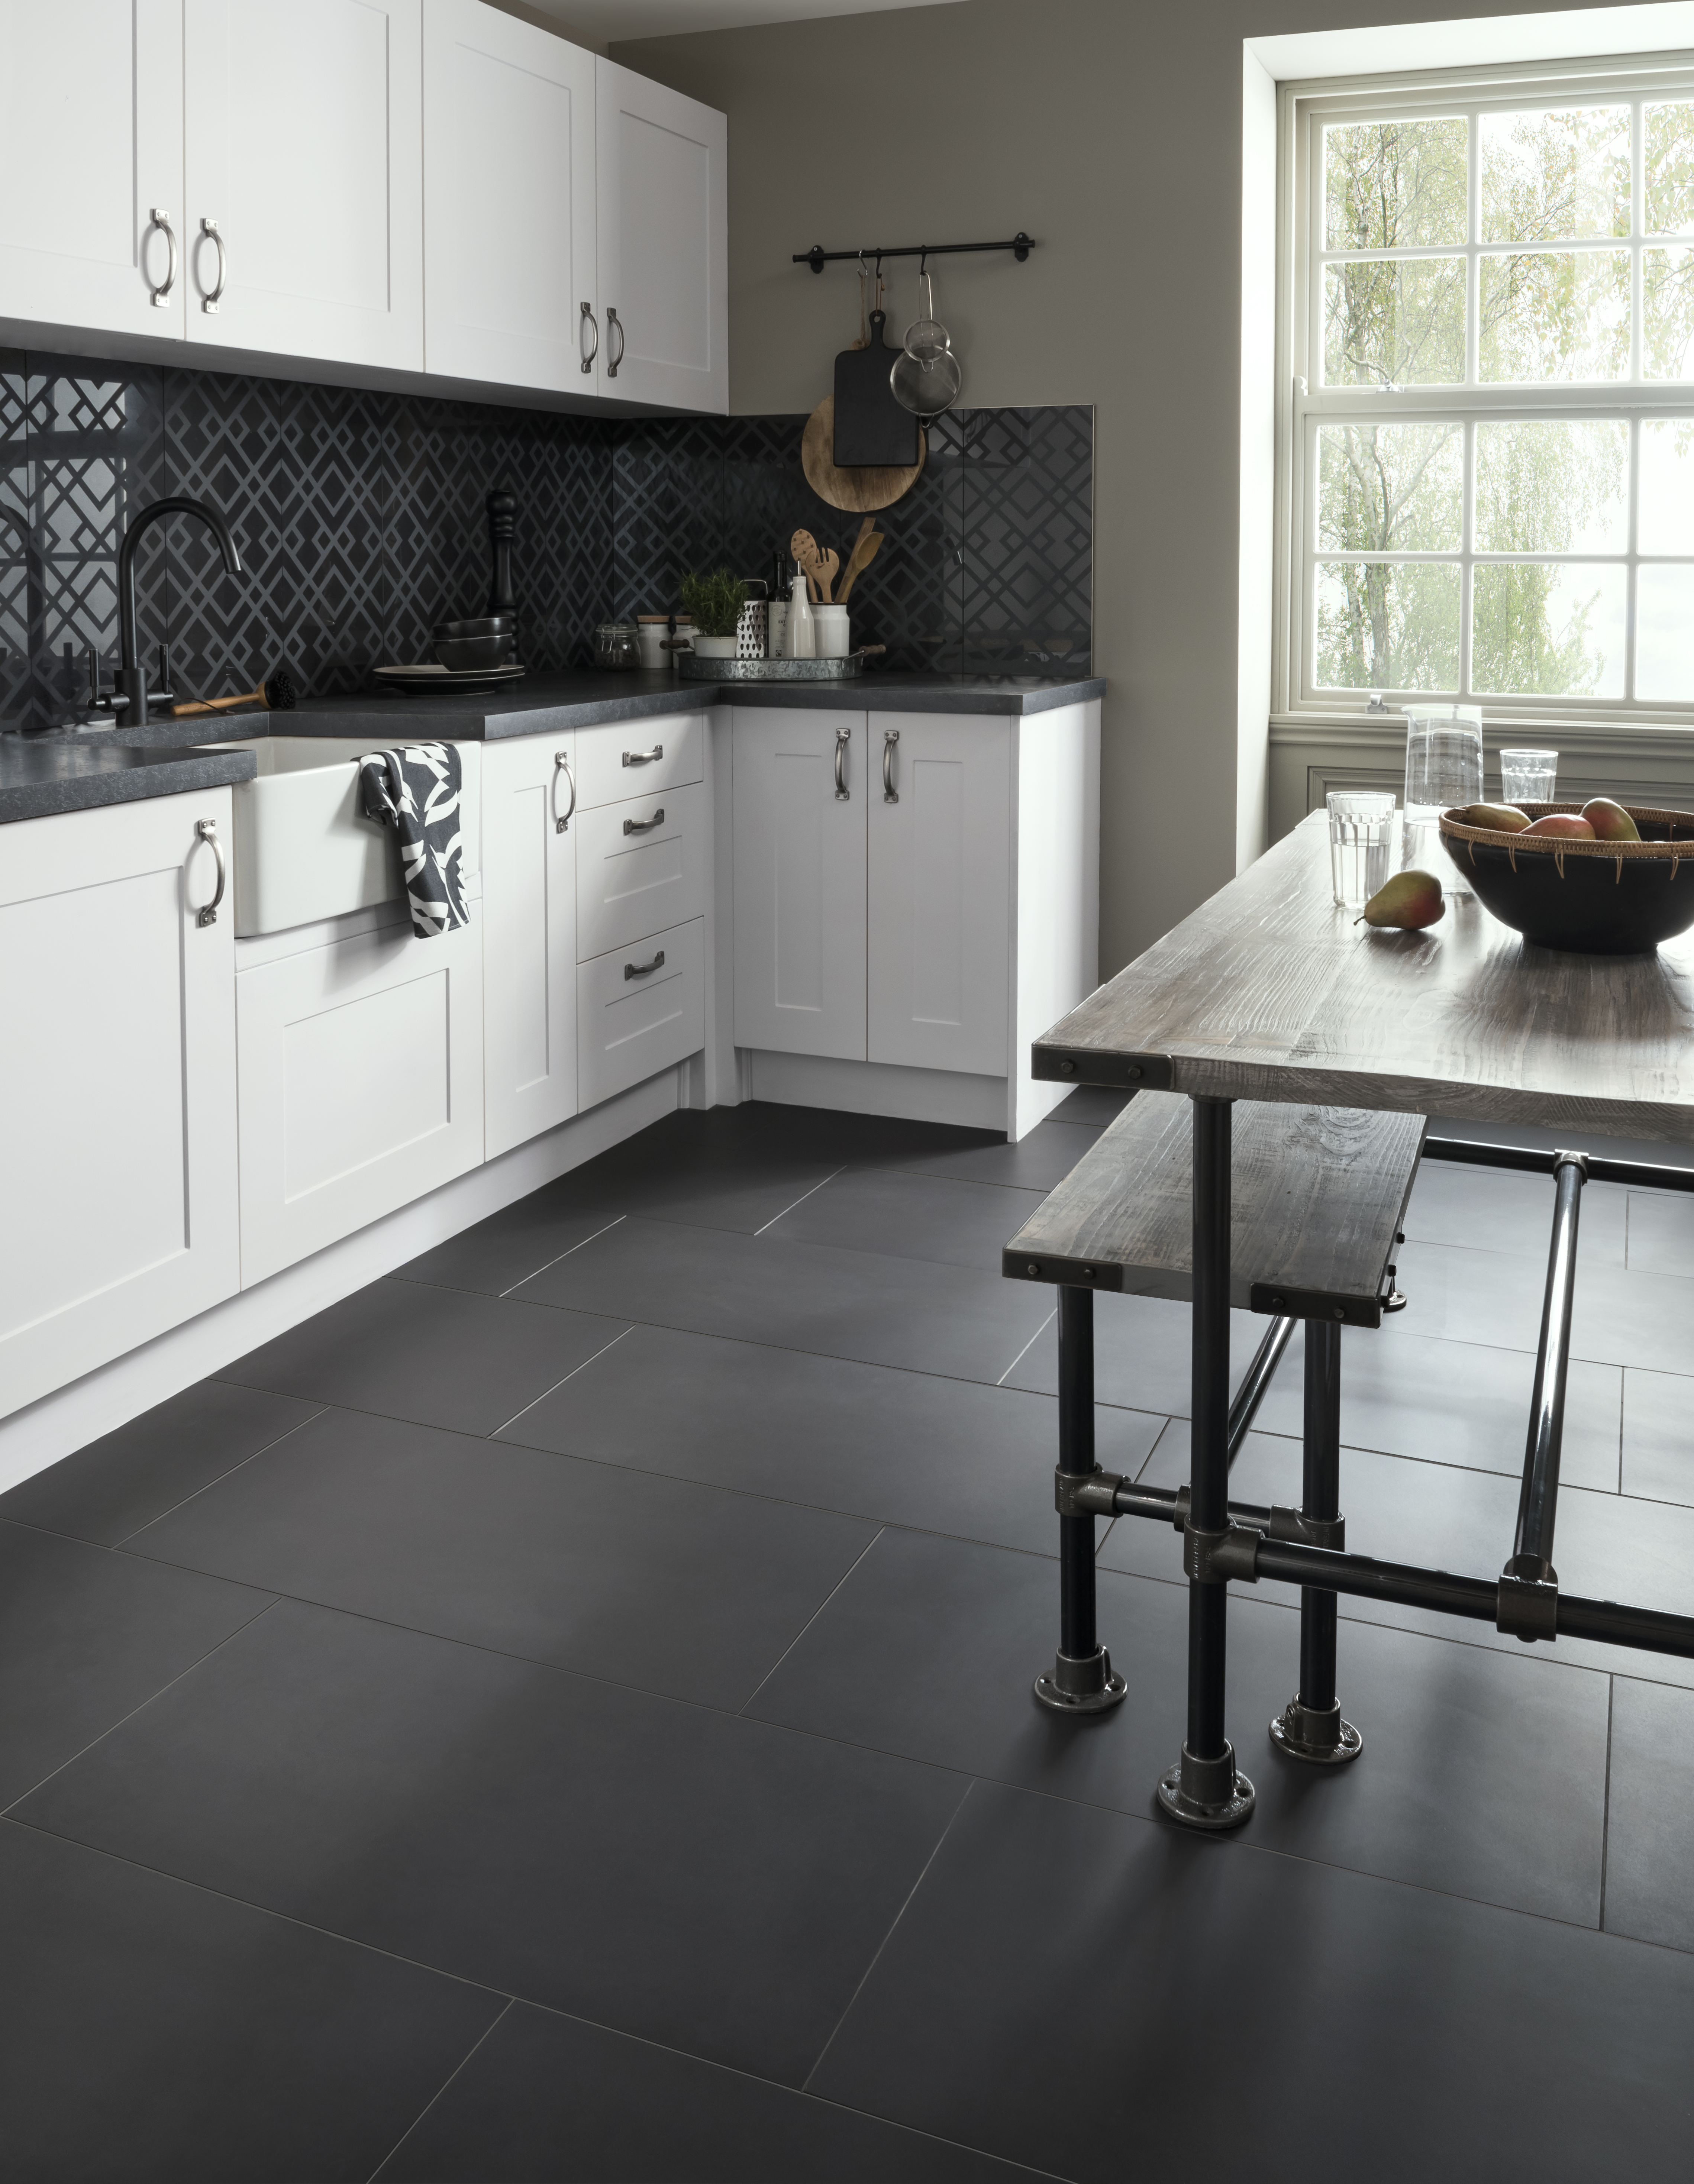 Which Brand Is Best For Tiles?